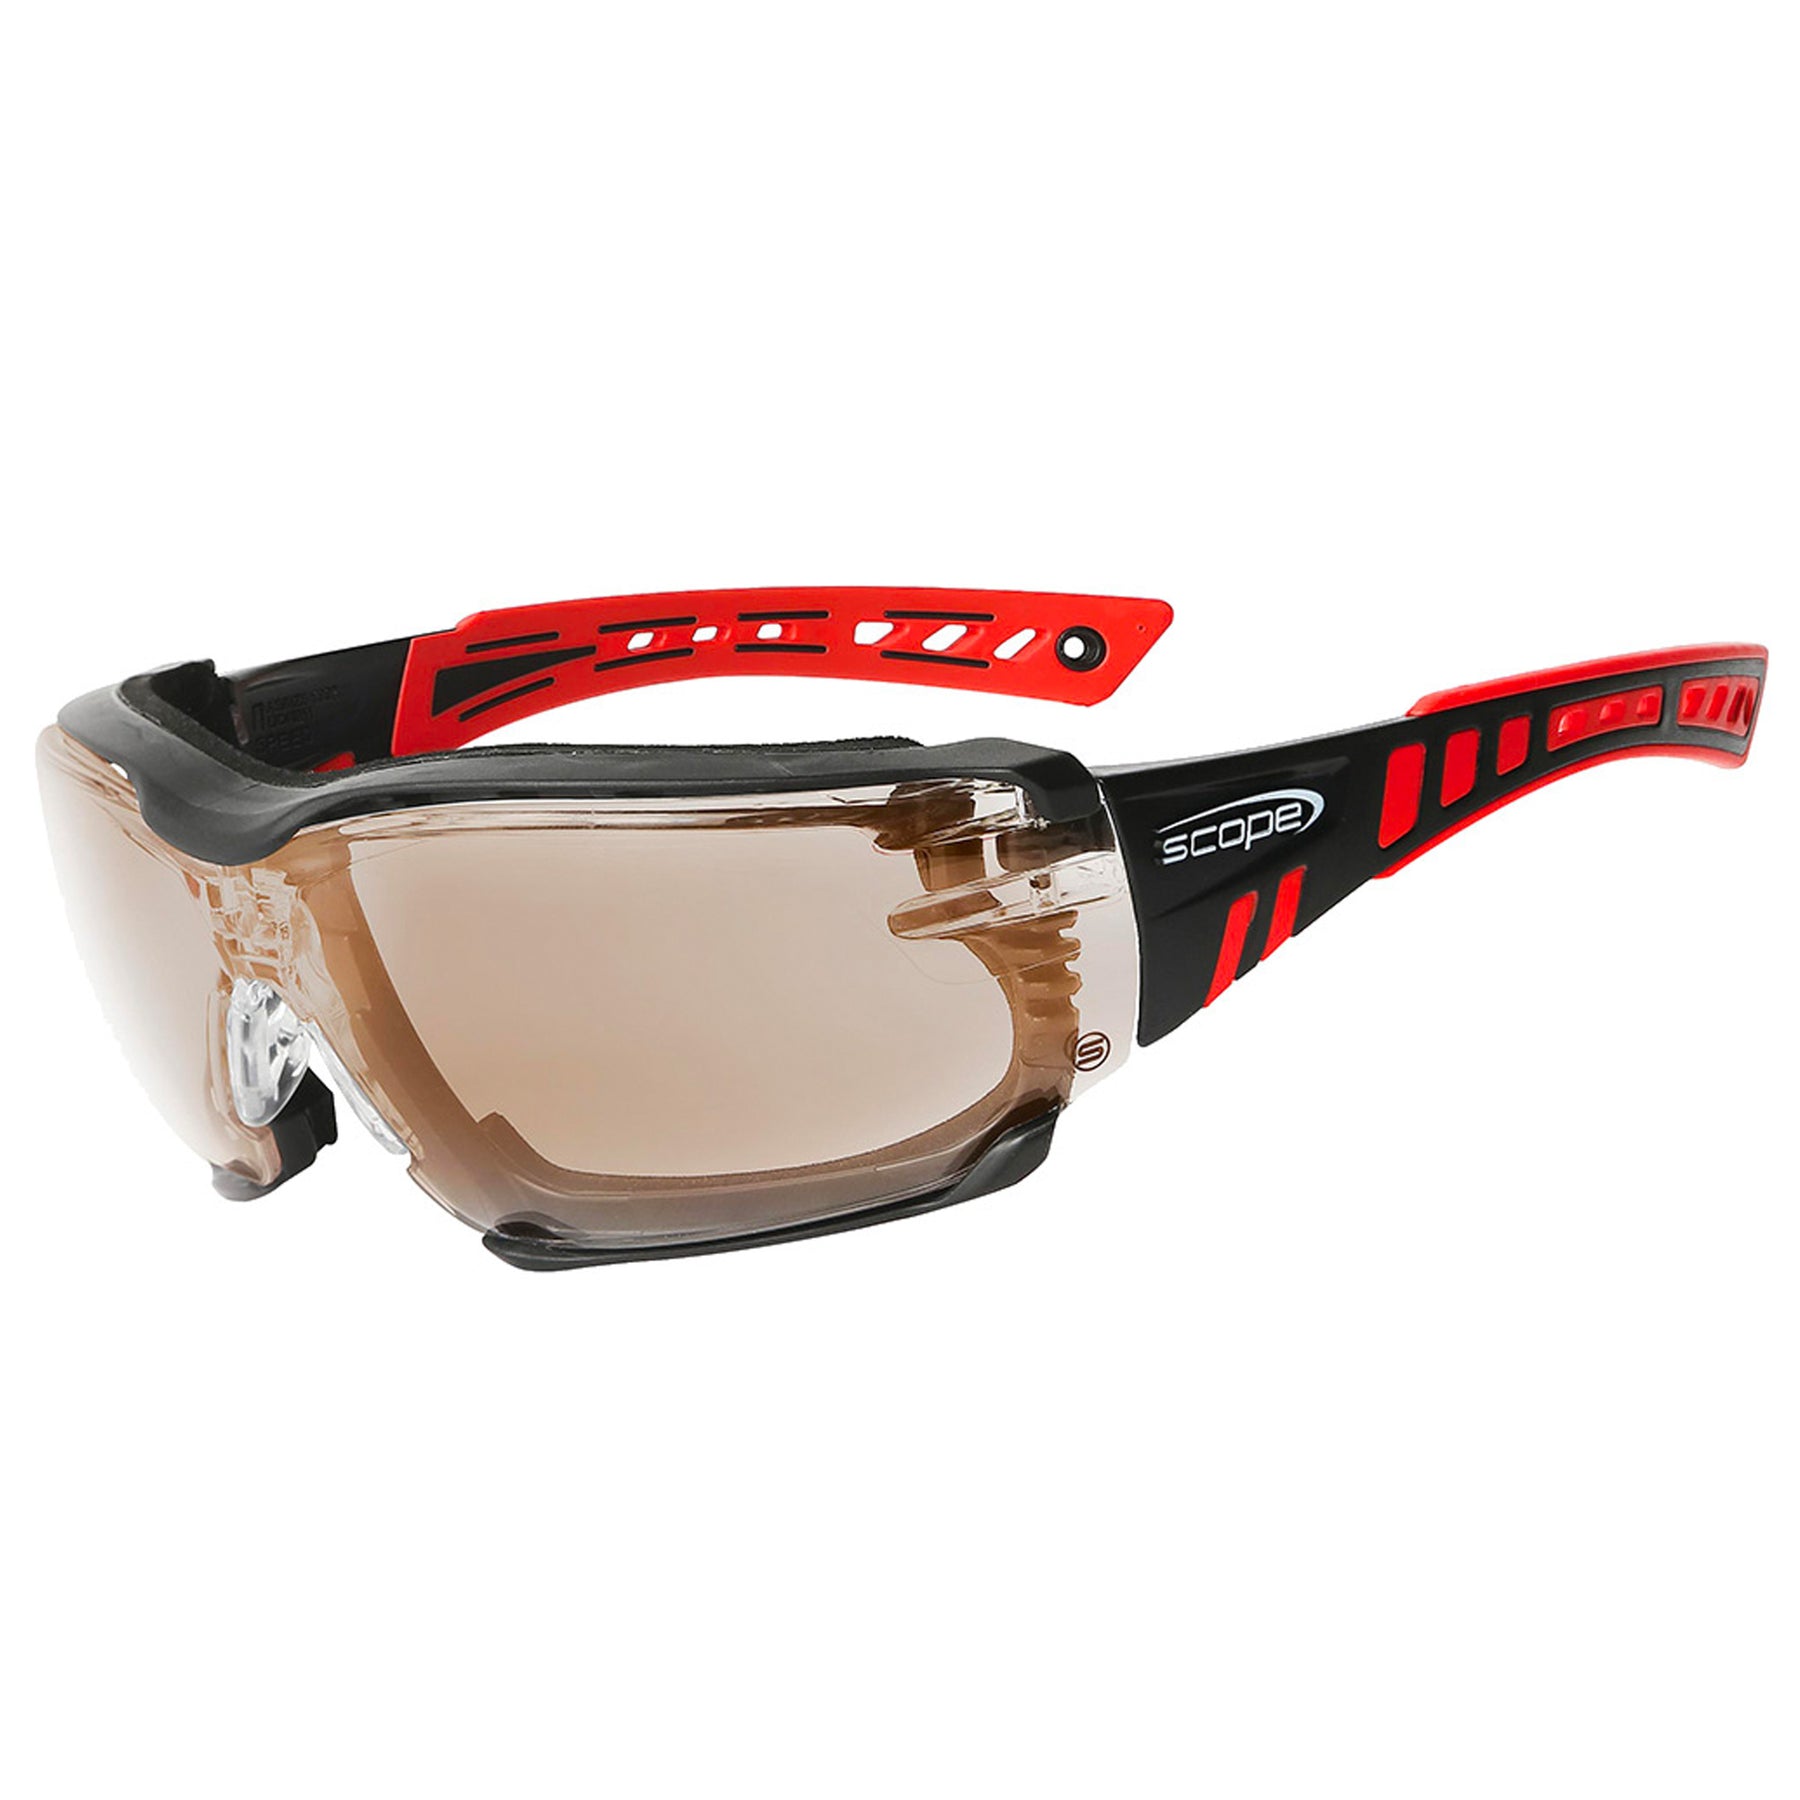 scope optics speed pro safety glasses with eclipse lens